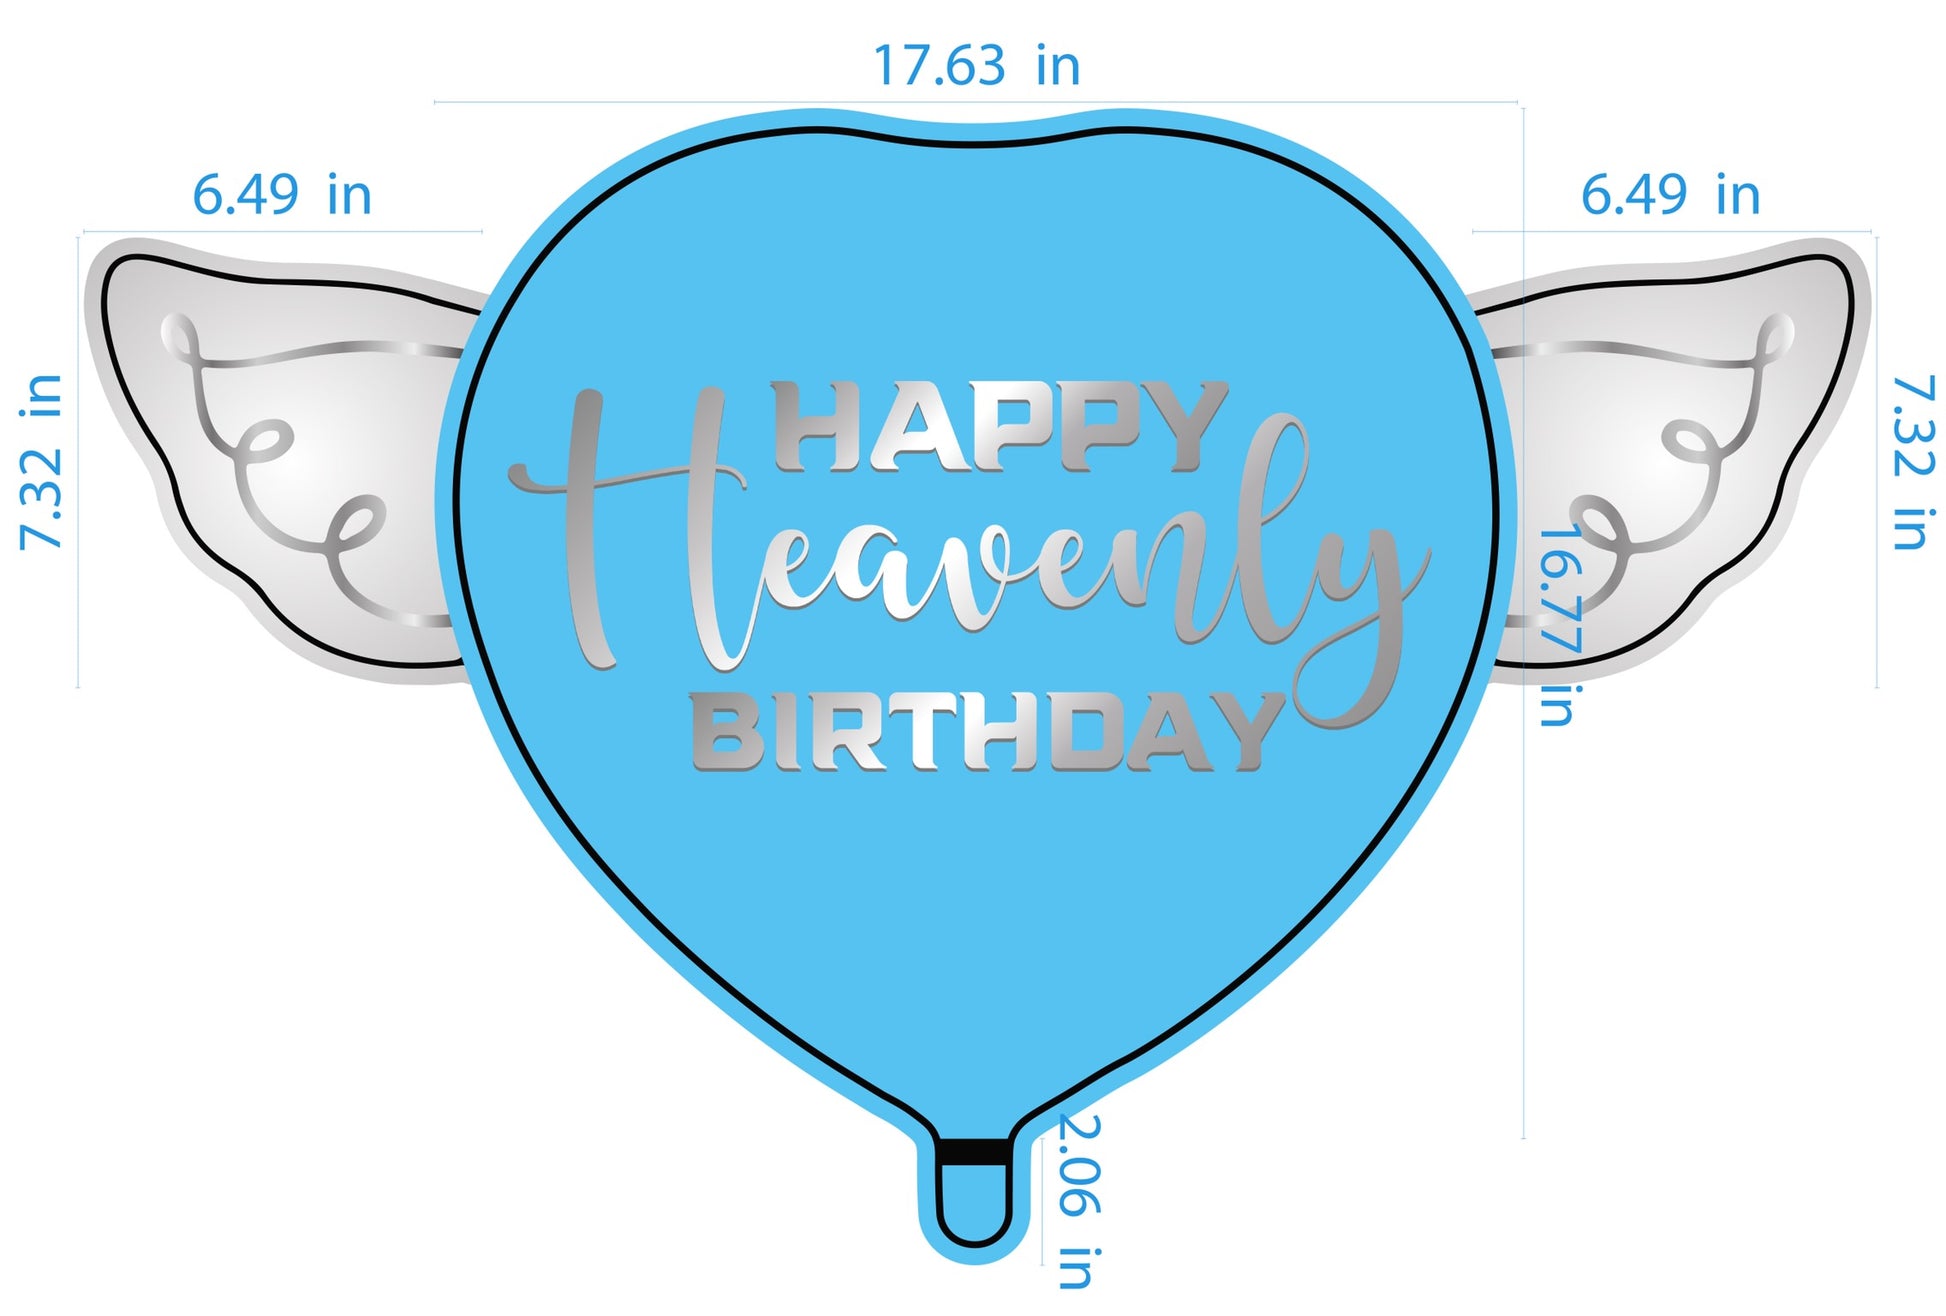 Happy Heavenly Birthday Heart Shaped Balloons with angel wings dimensions